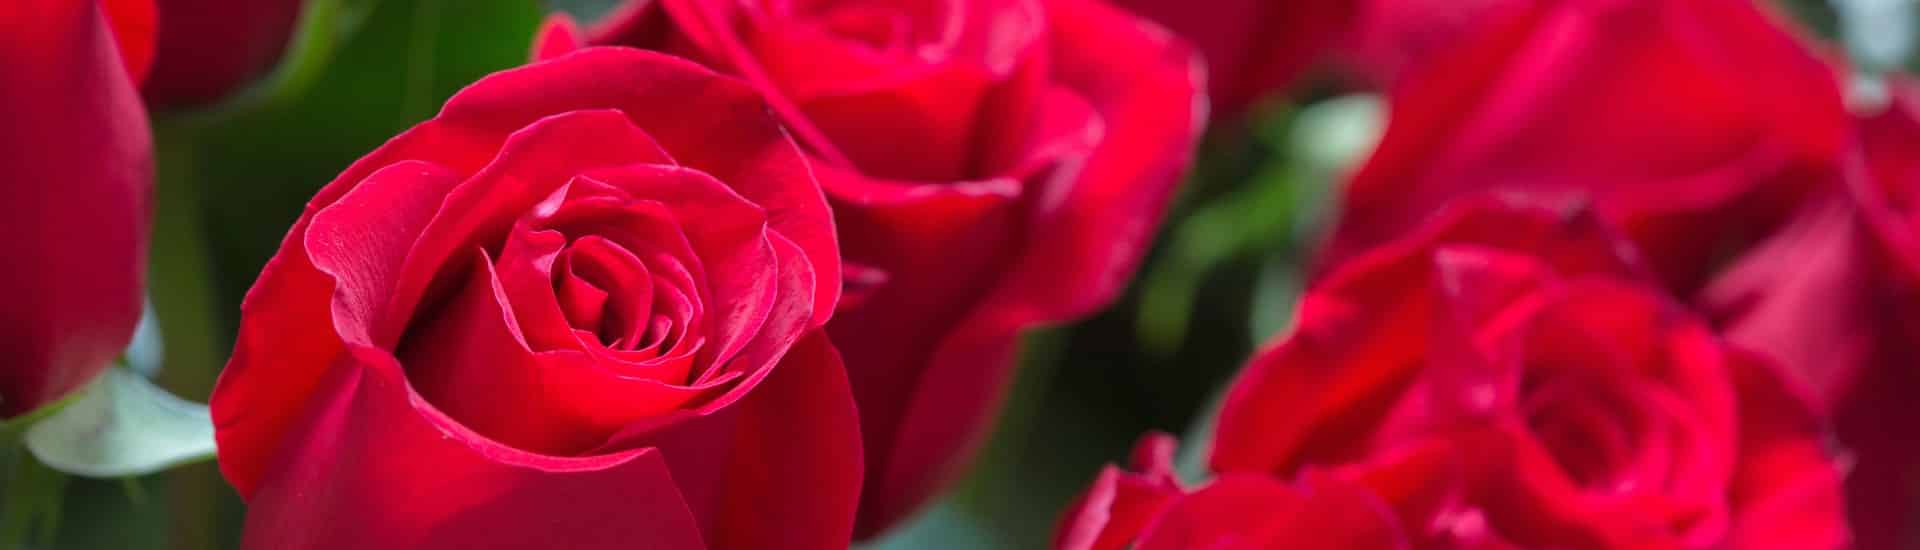 Up close grouping of bright red roses with green leaves